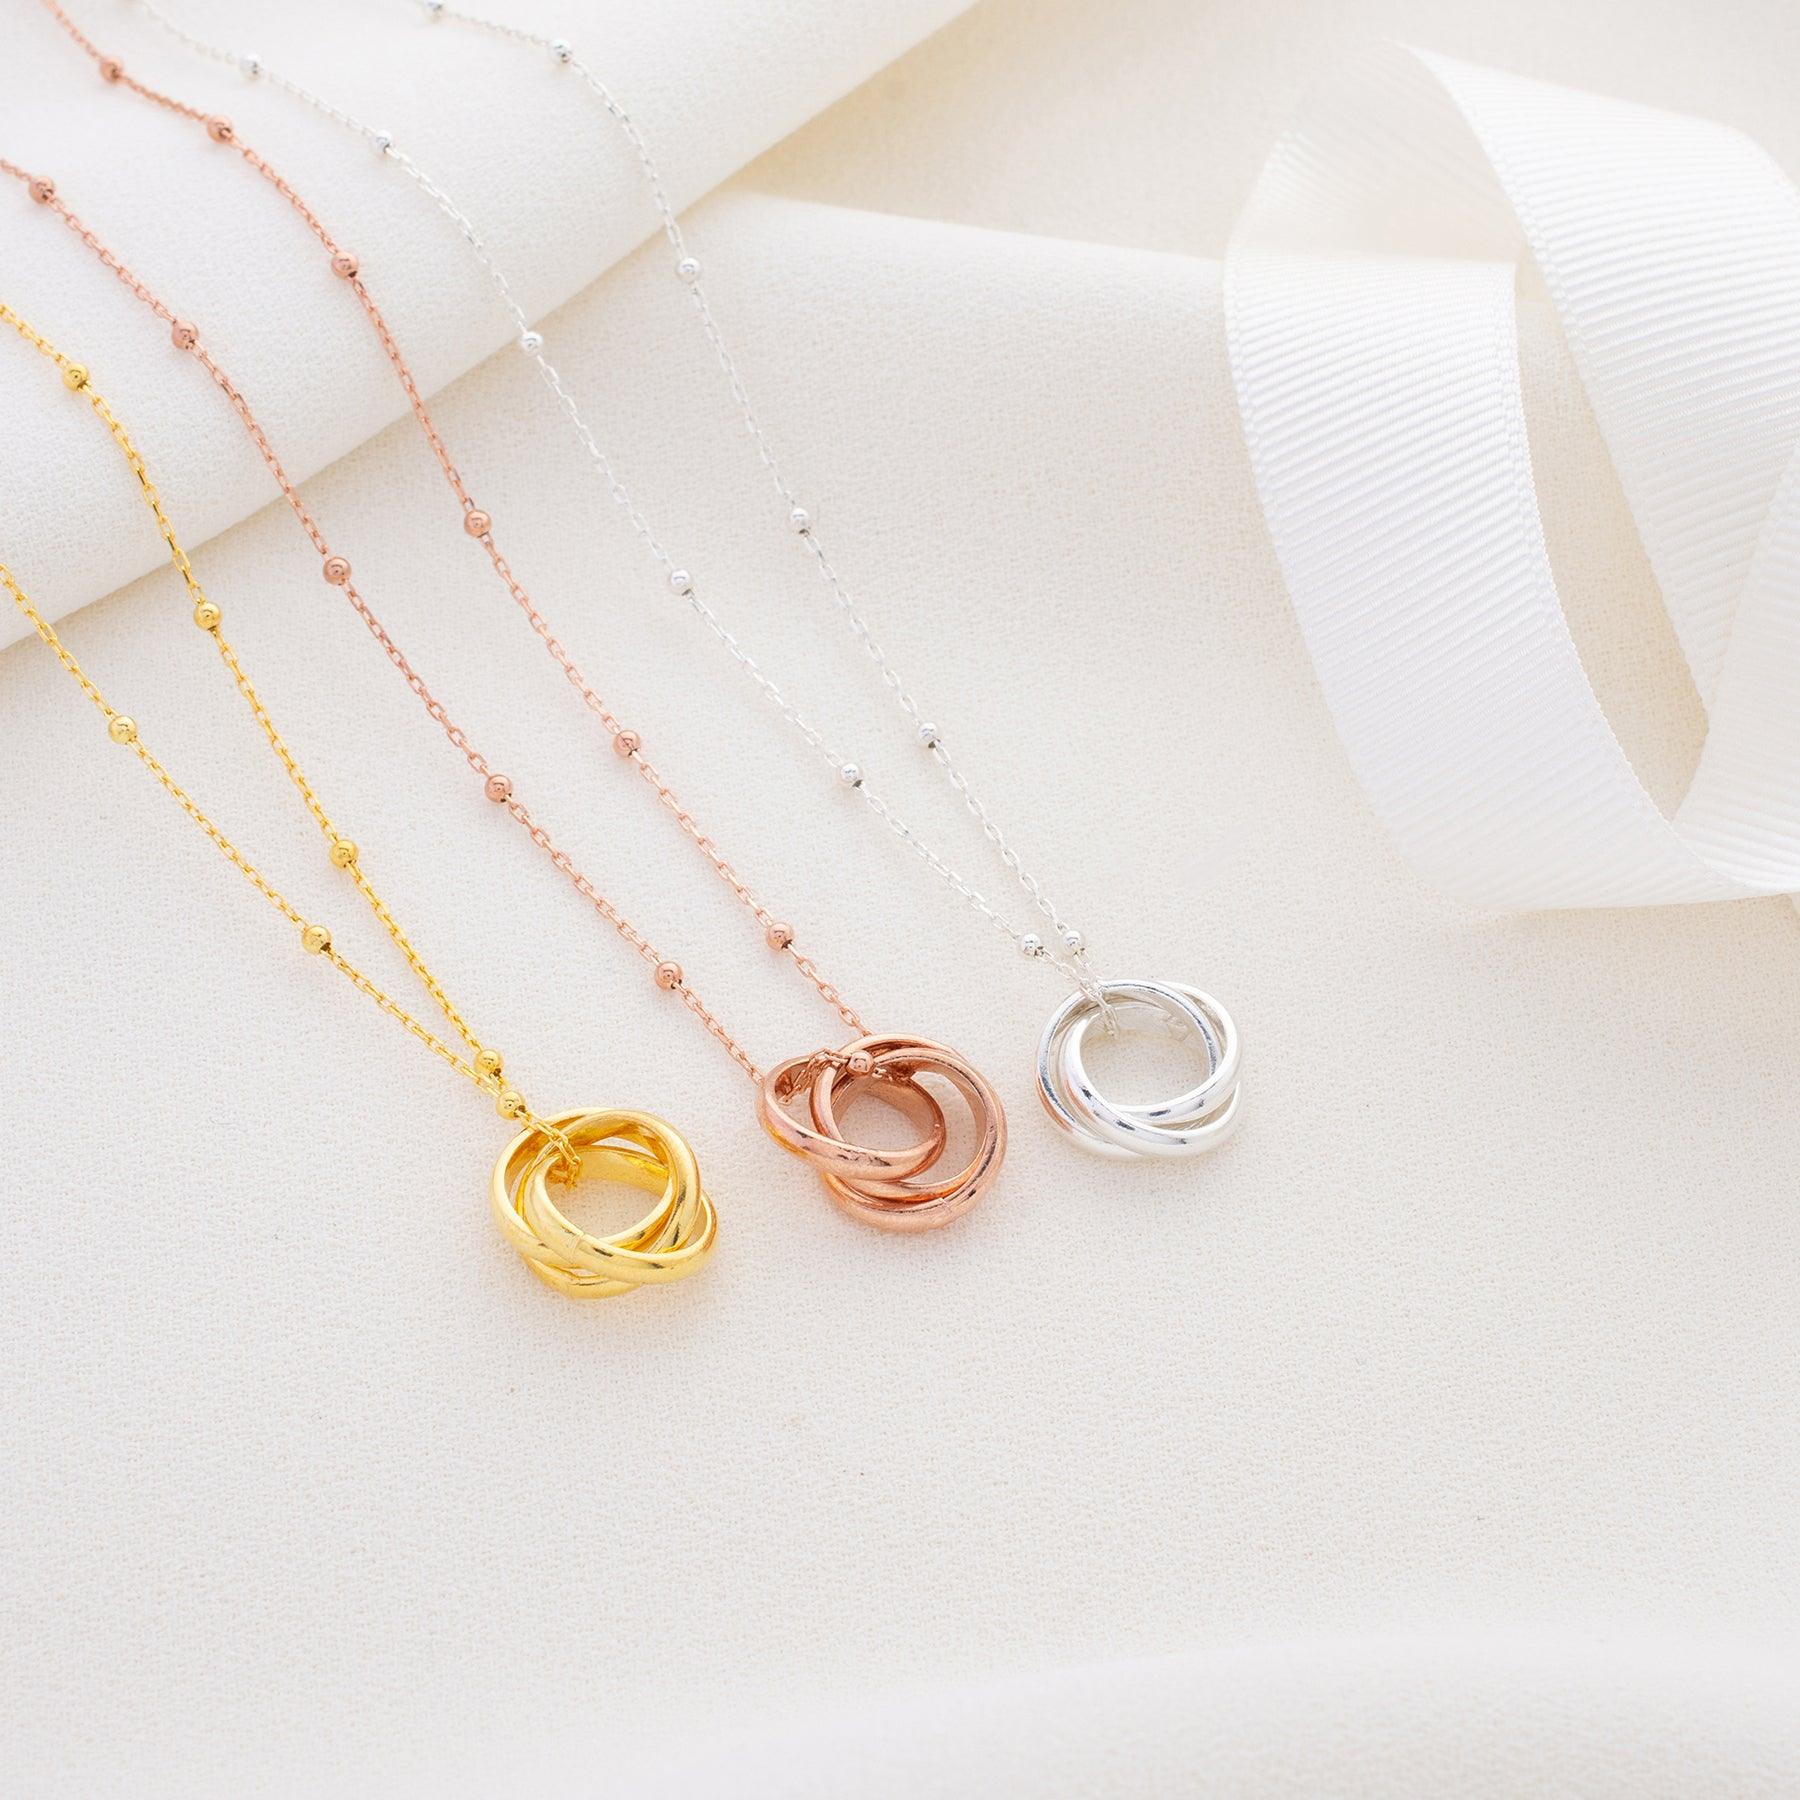 Interlocking Circles Satellite Necklace • Russian Ring Silver Necklace - Trending Silver Gifts